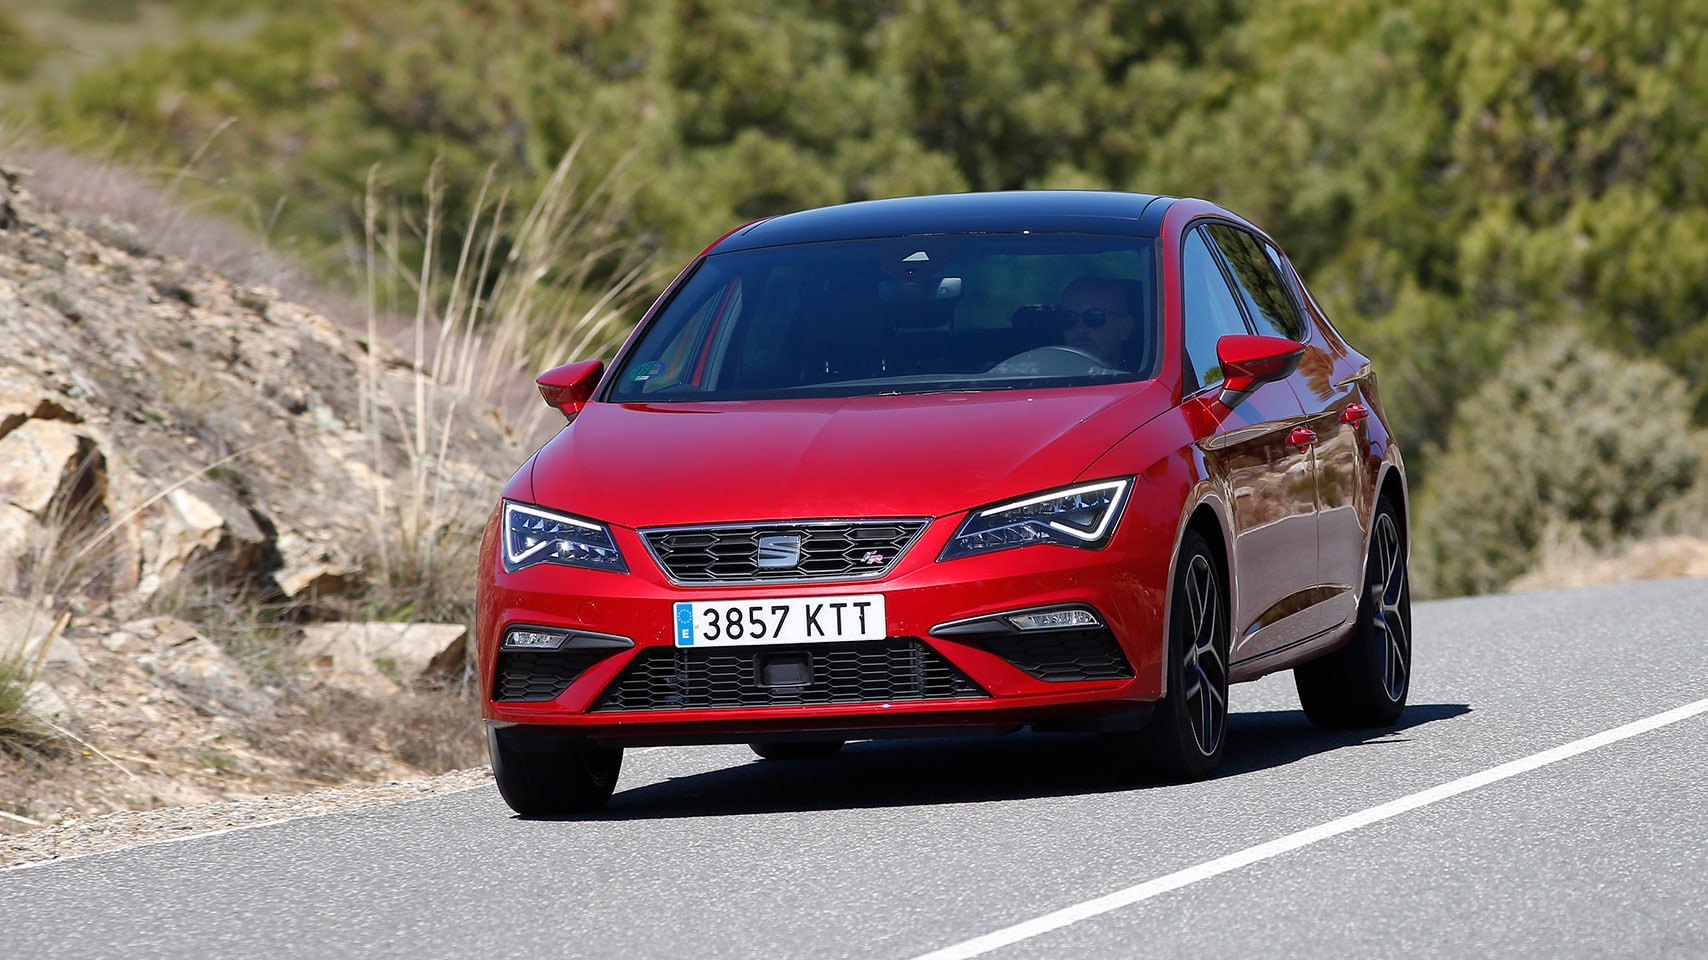 SEAT Leon FR driving in the road